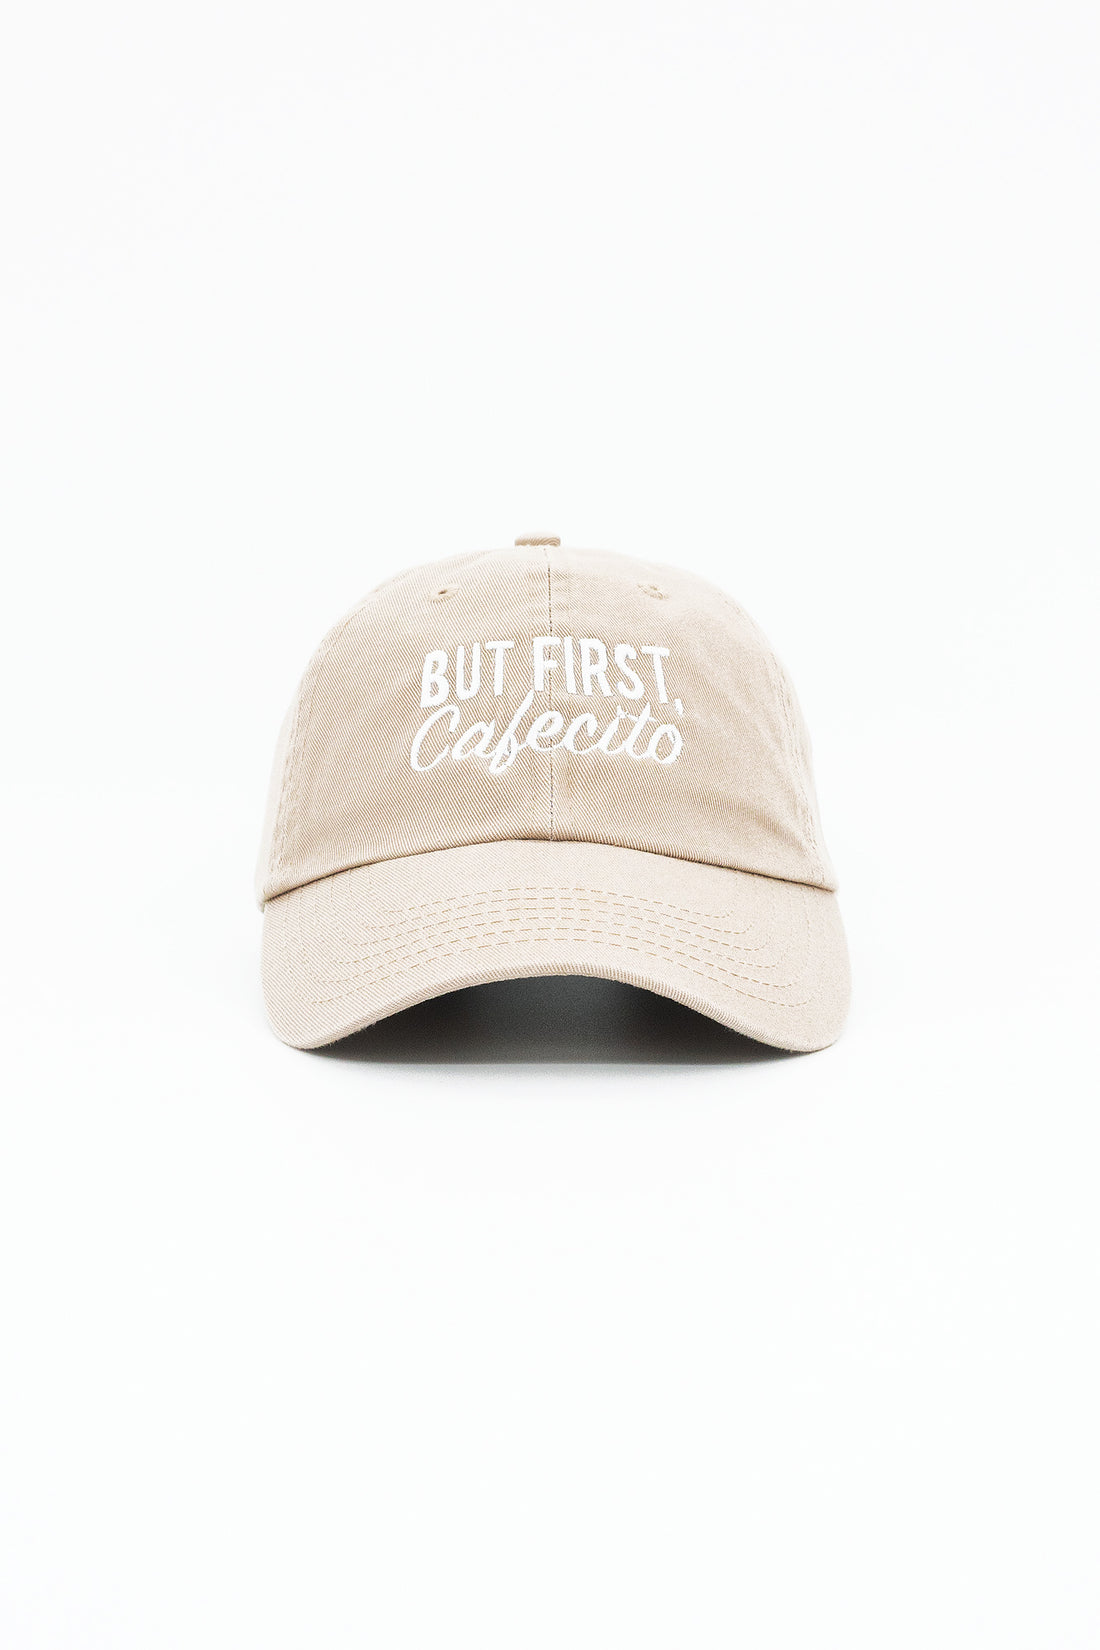 But First, Cafecito Hat